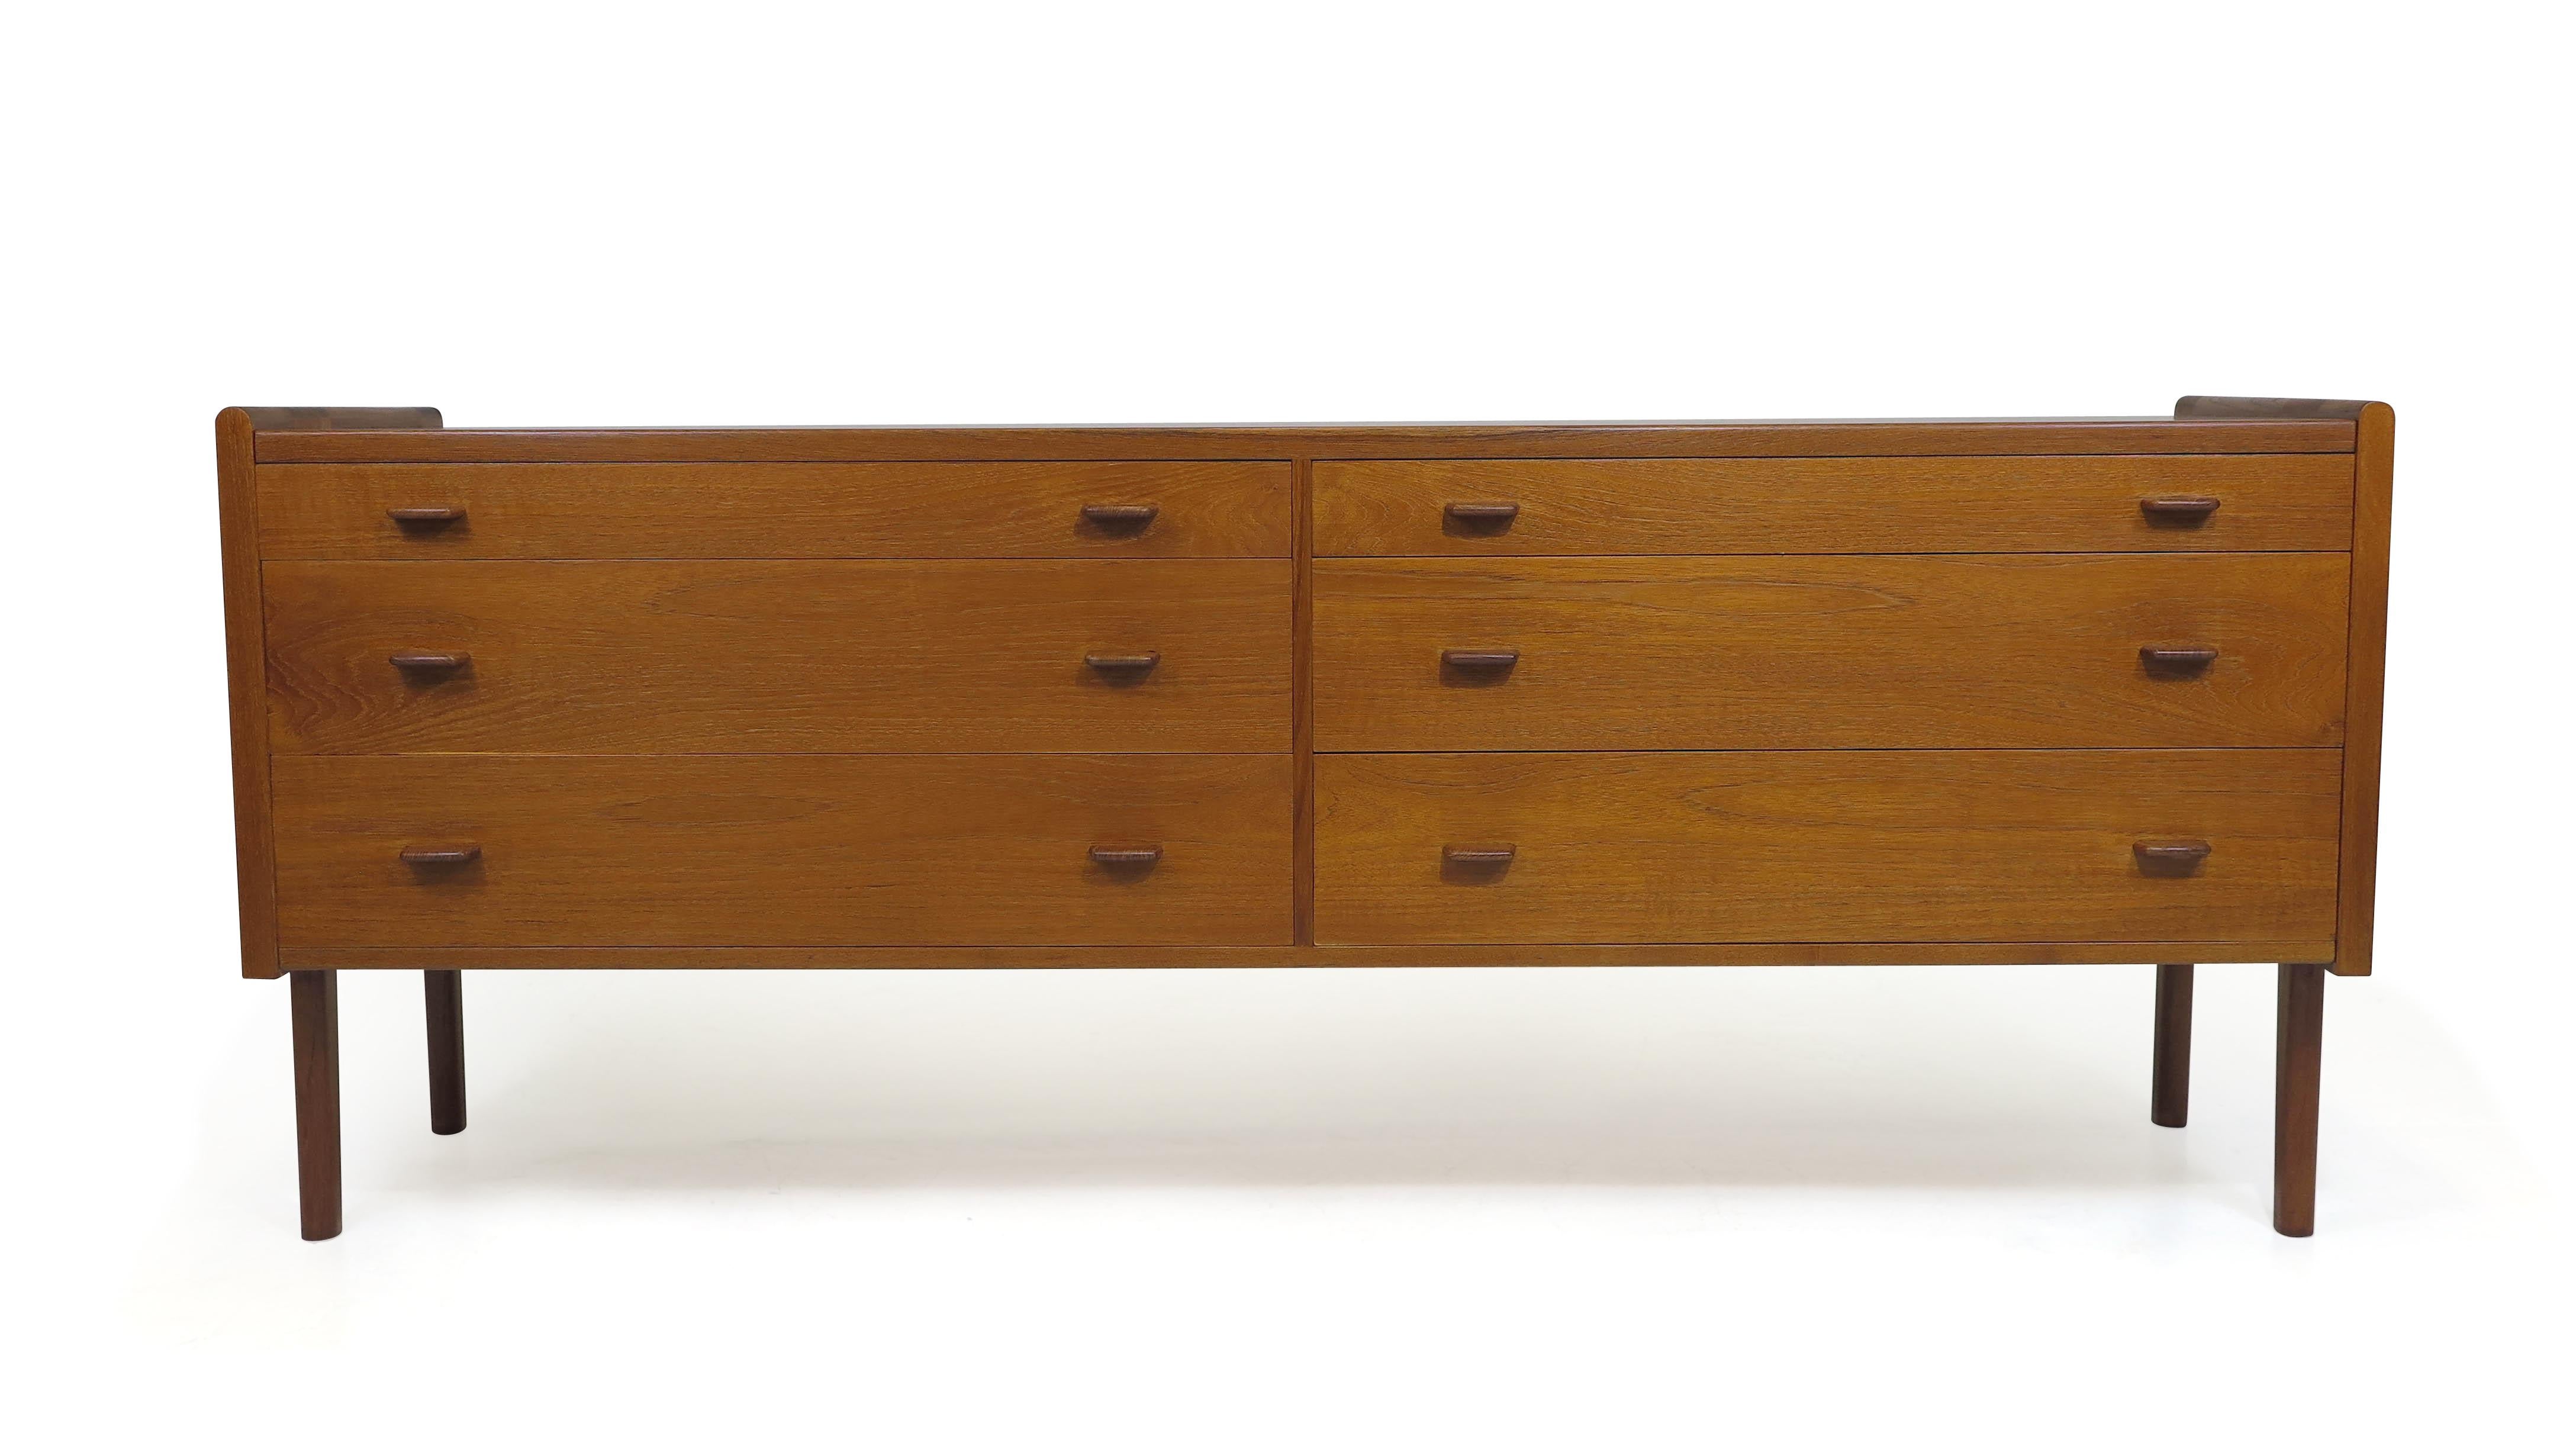 Teak dresser designed by Hans Wegner for Ry Mobler 1958 Denmark. The dresser is finely crafted of teak with six drawers, sculpted hand pulls, and raised on solid teak legs. Excellent condition with minor signs of age and use.